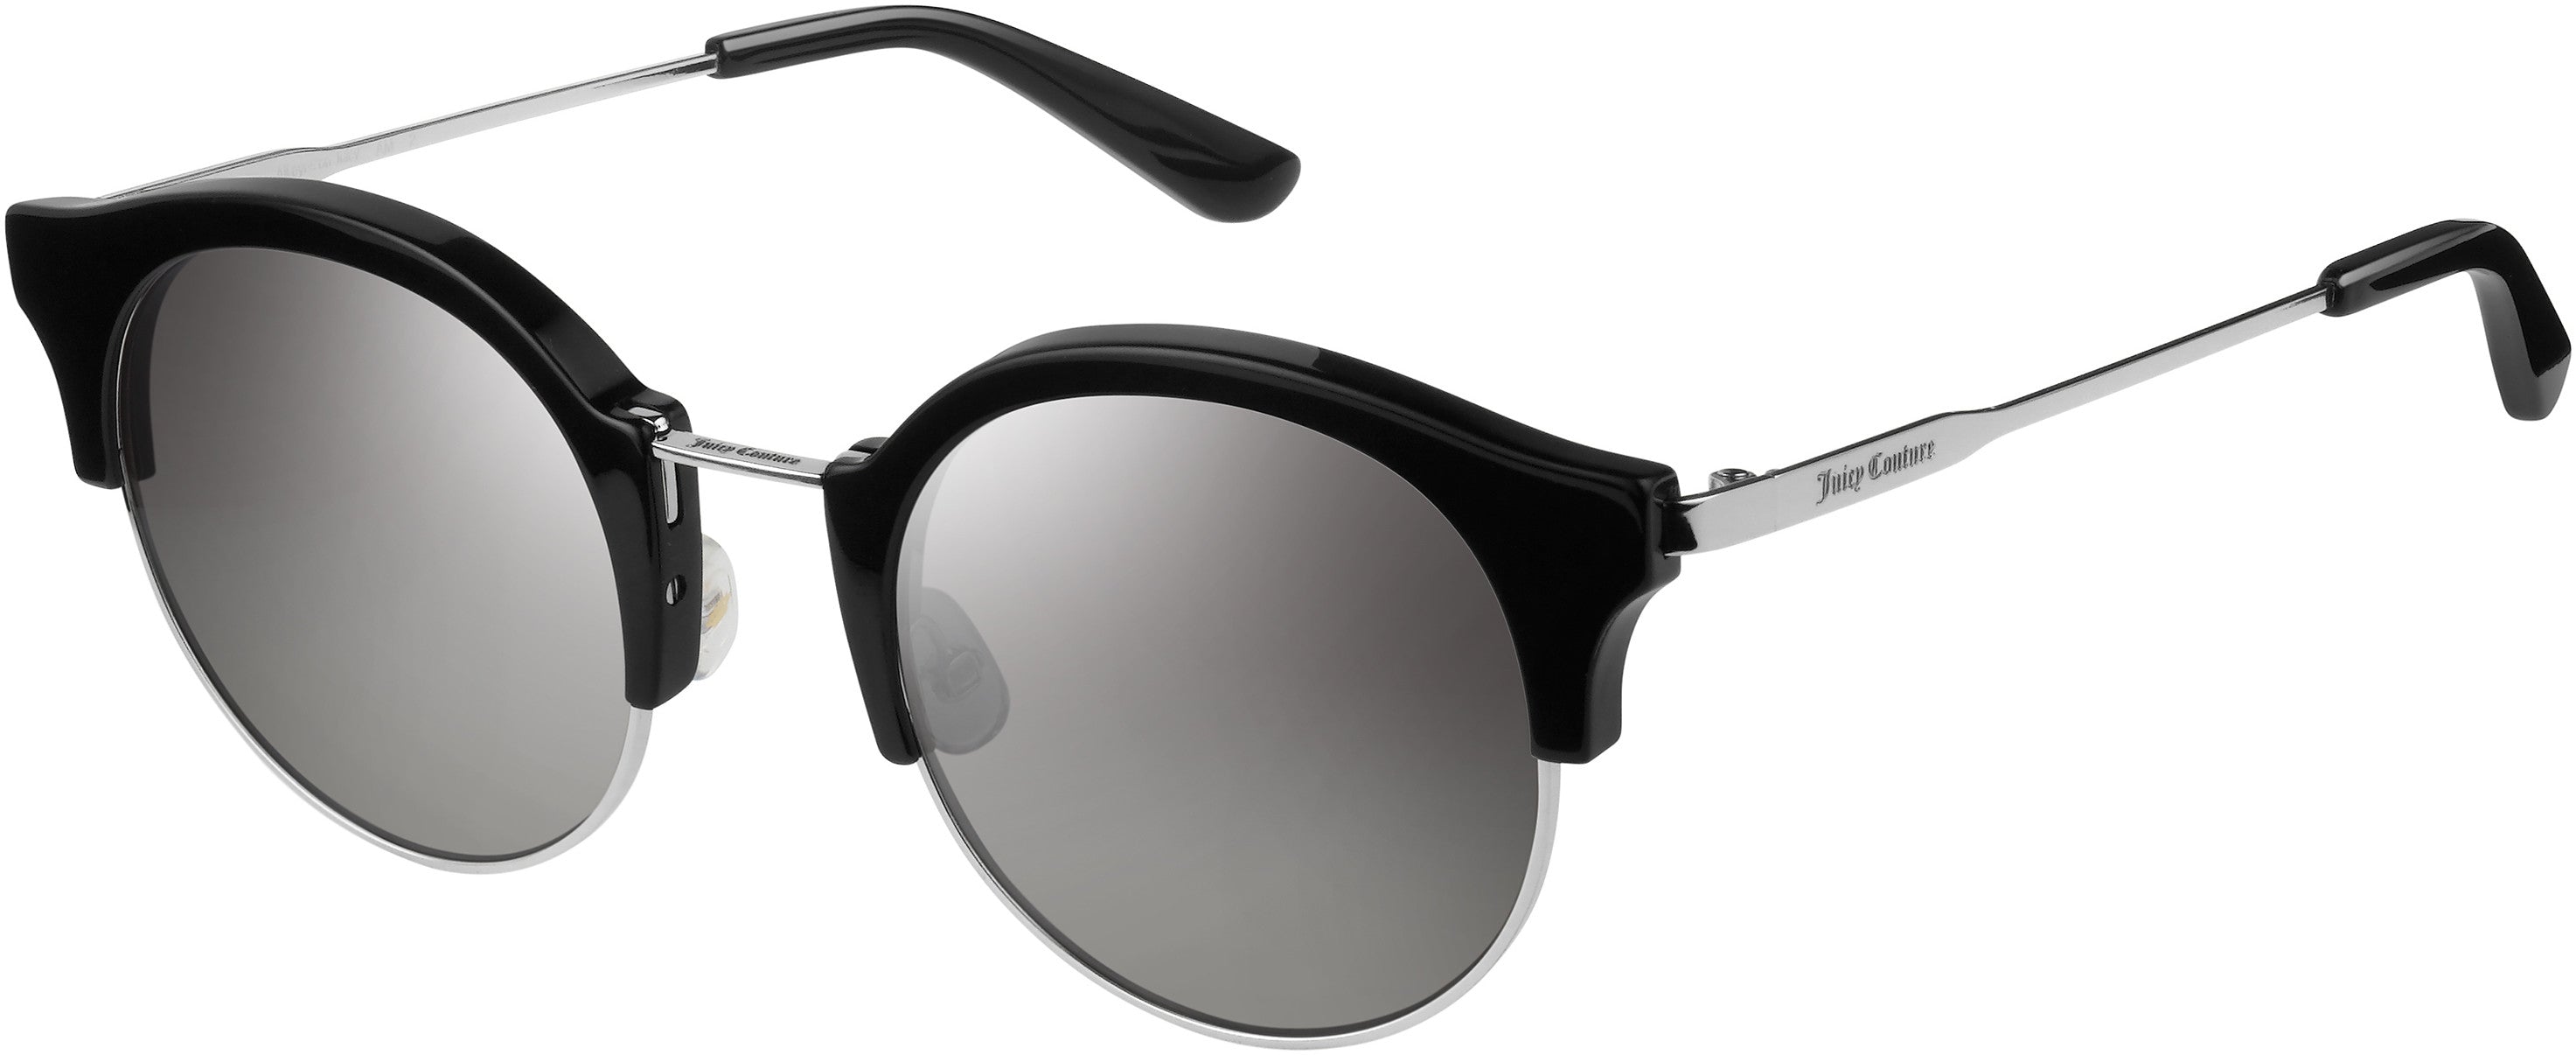 Juicy Couture Juicy 601/S Oval Modified Sunglasses 0807-0807  Black (IC Gray Mirror Shaded Silver)